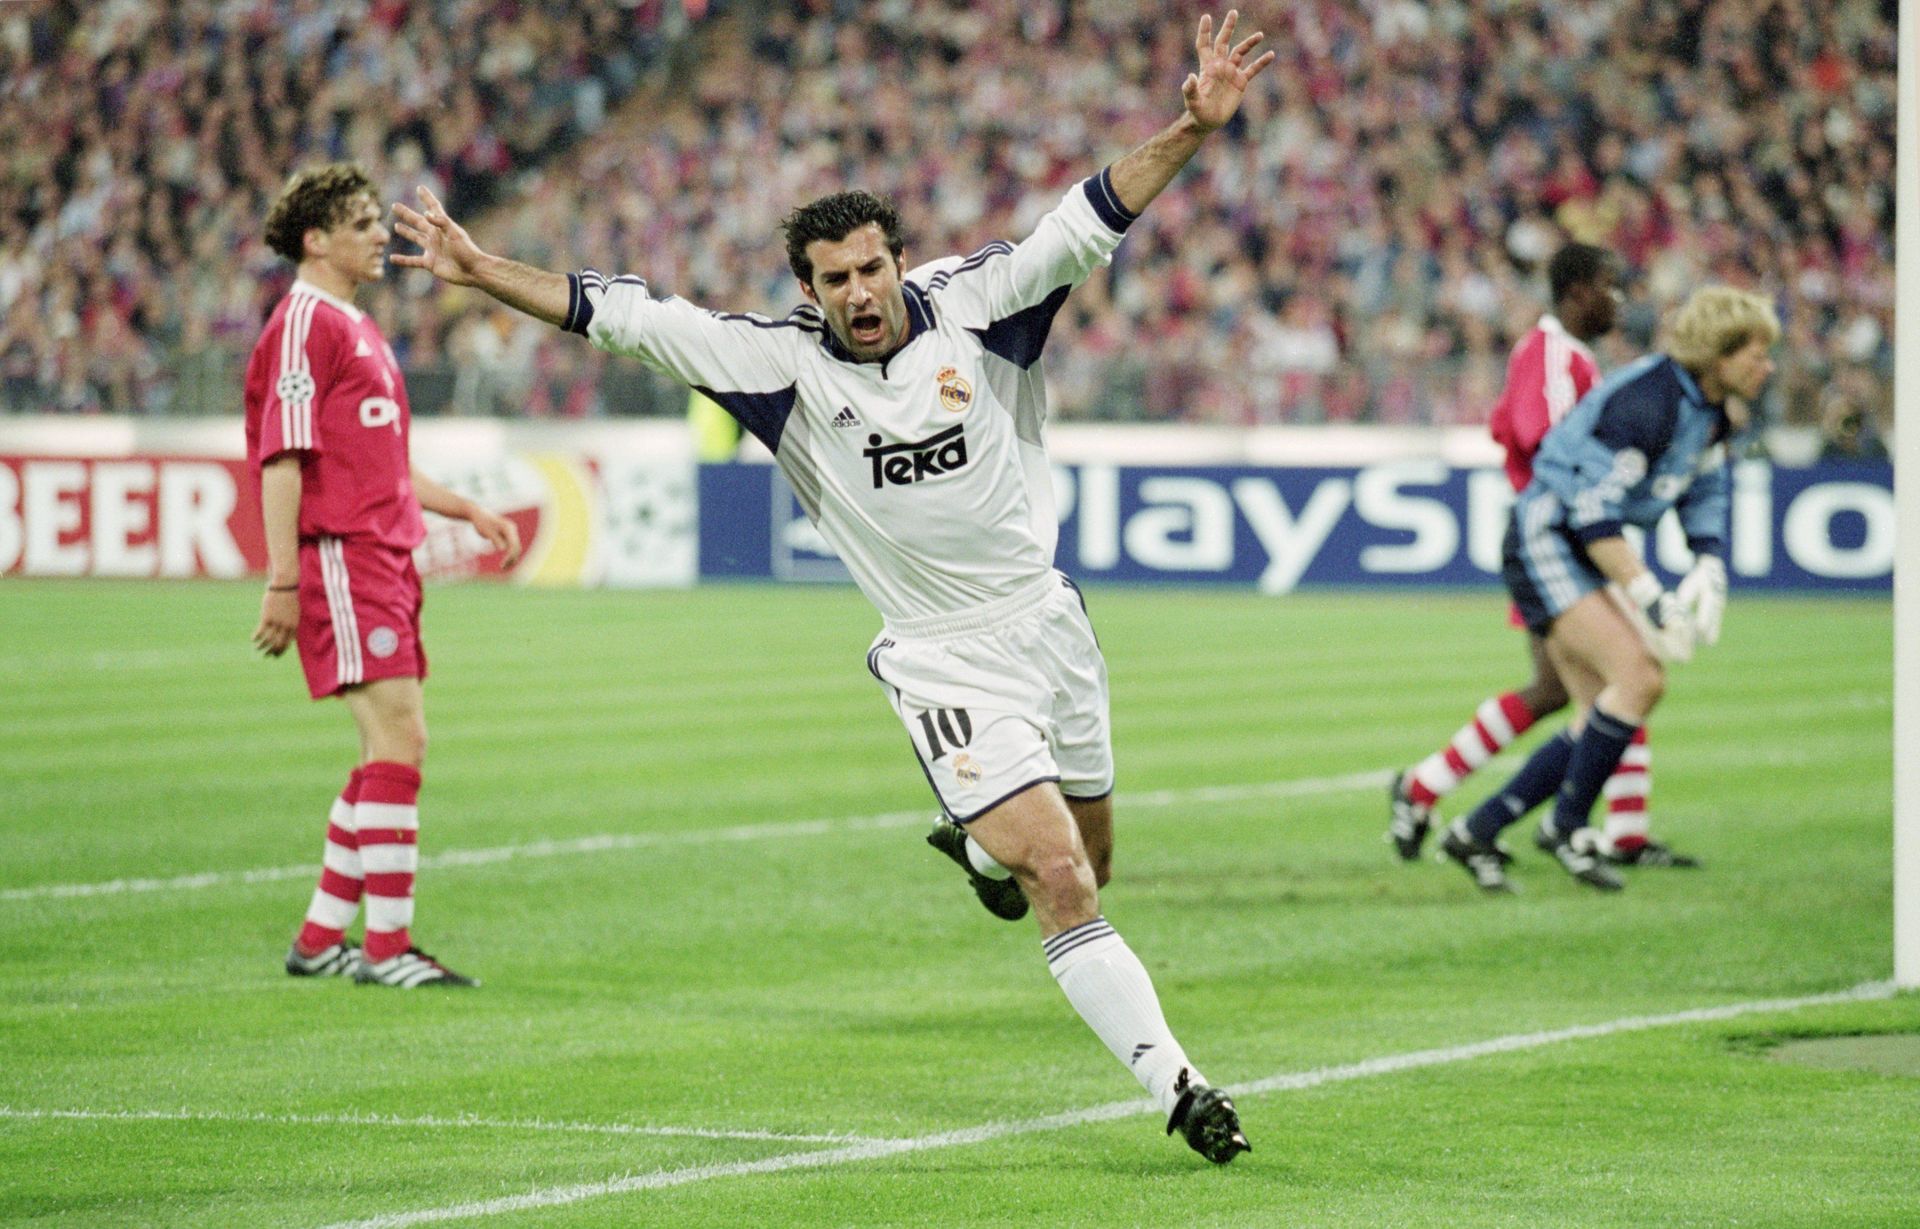 Luis Figo celebrates after scoring a goal for Real Madrid